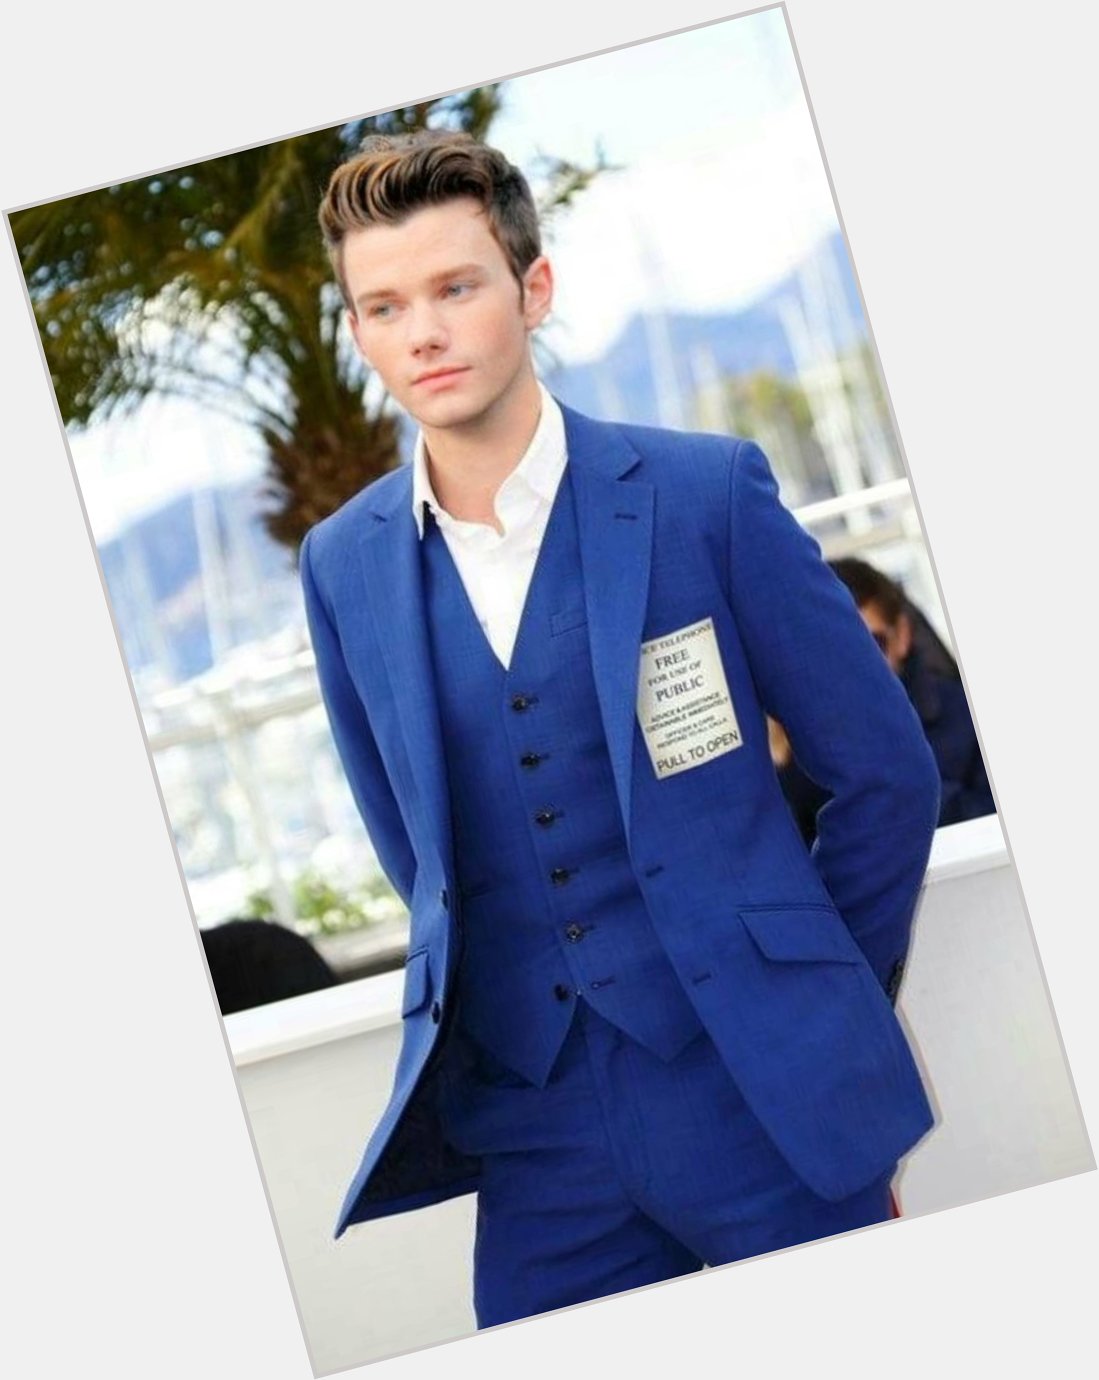 HAPPY BIRTHDAY TO THE ONE, AND ONLY CHRIS COLFER  